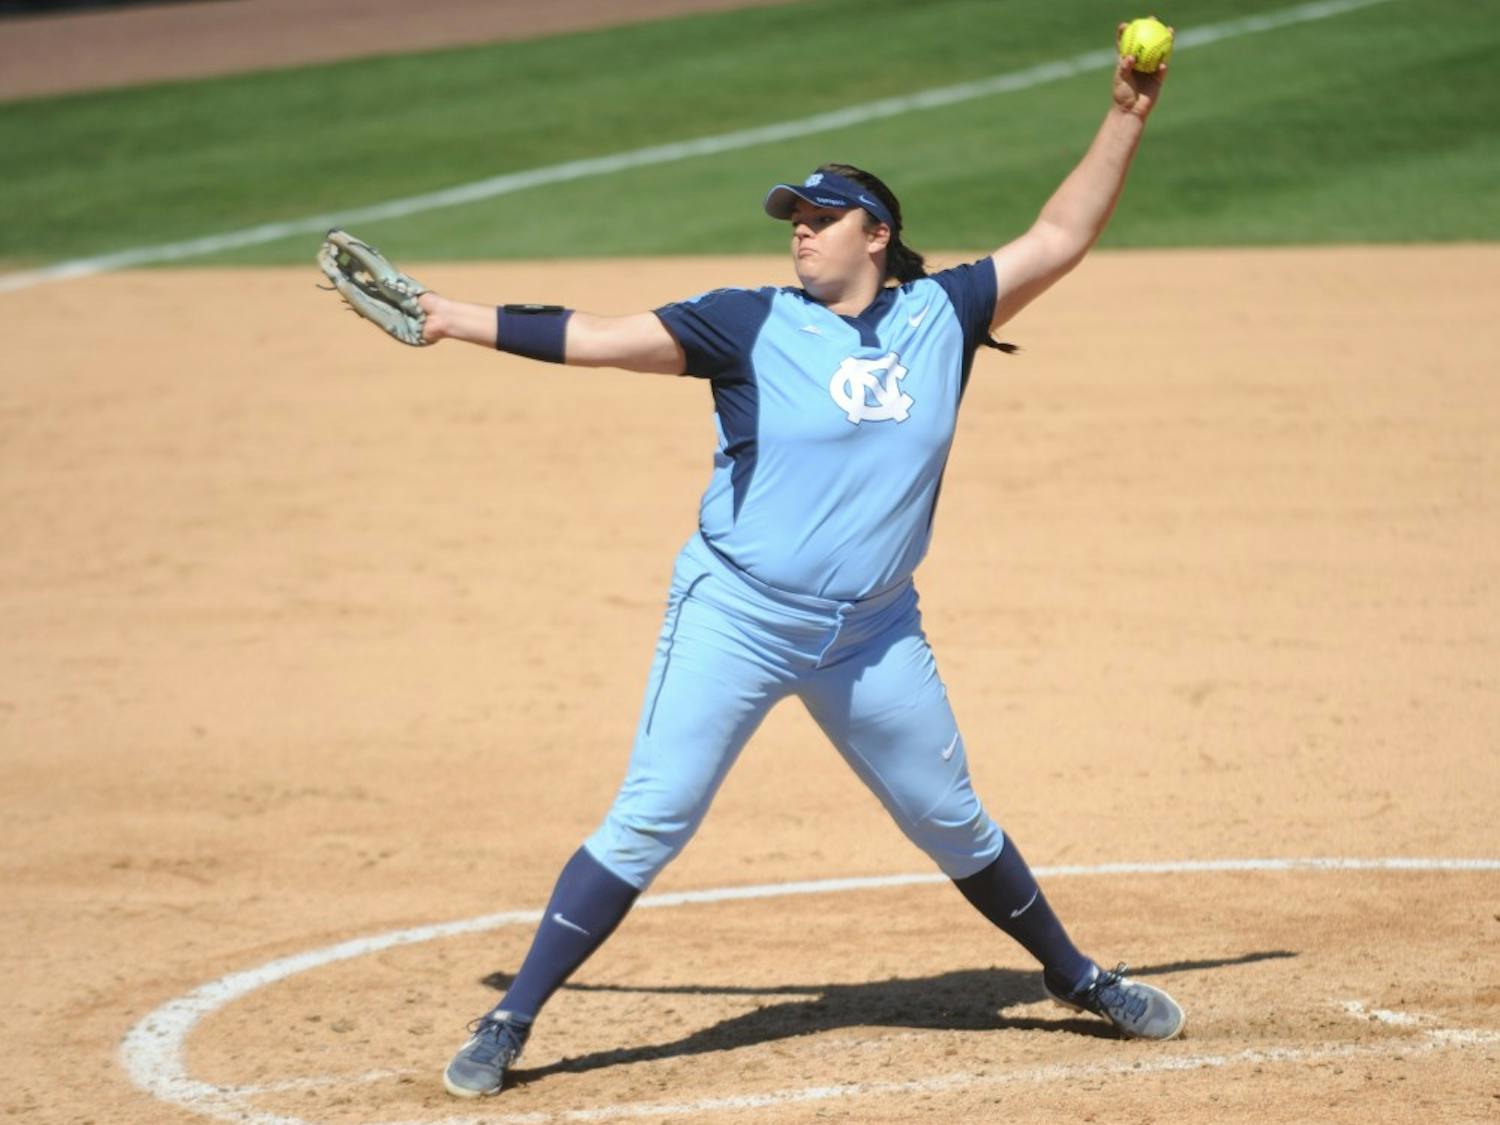 Brittany Pickett (28) pitches during UNC's Softball game vs. Georgia Tech on Sunday, Mar. 24. UNC lost the game 3-2.